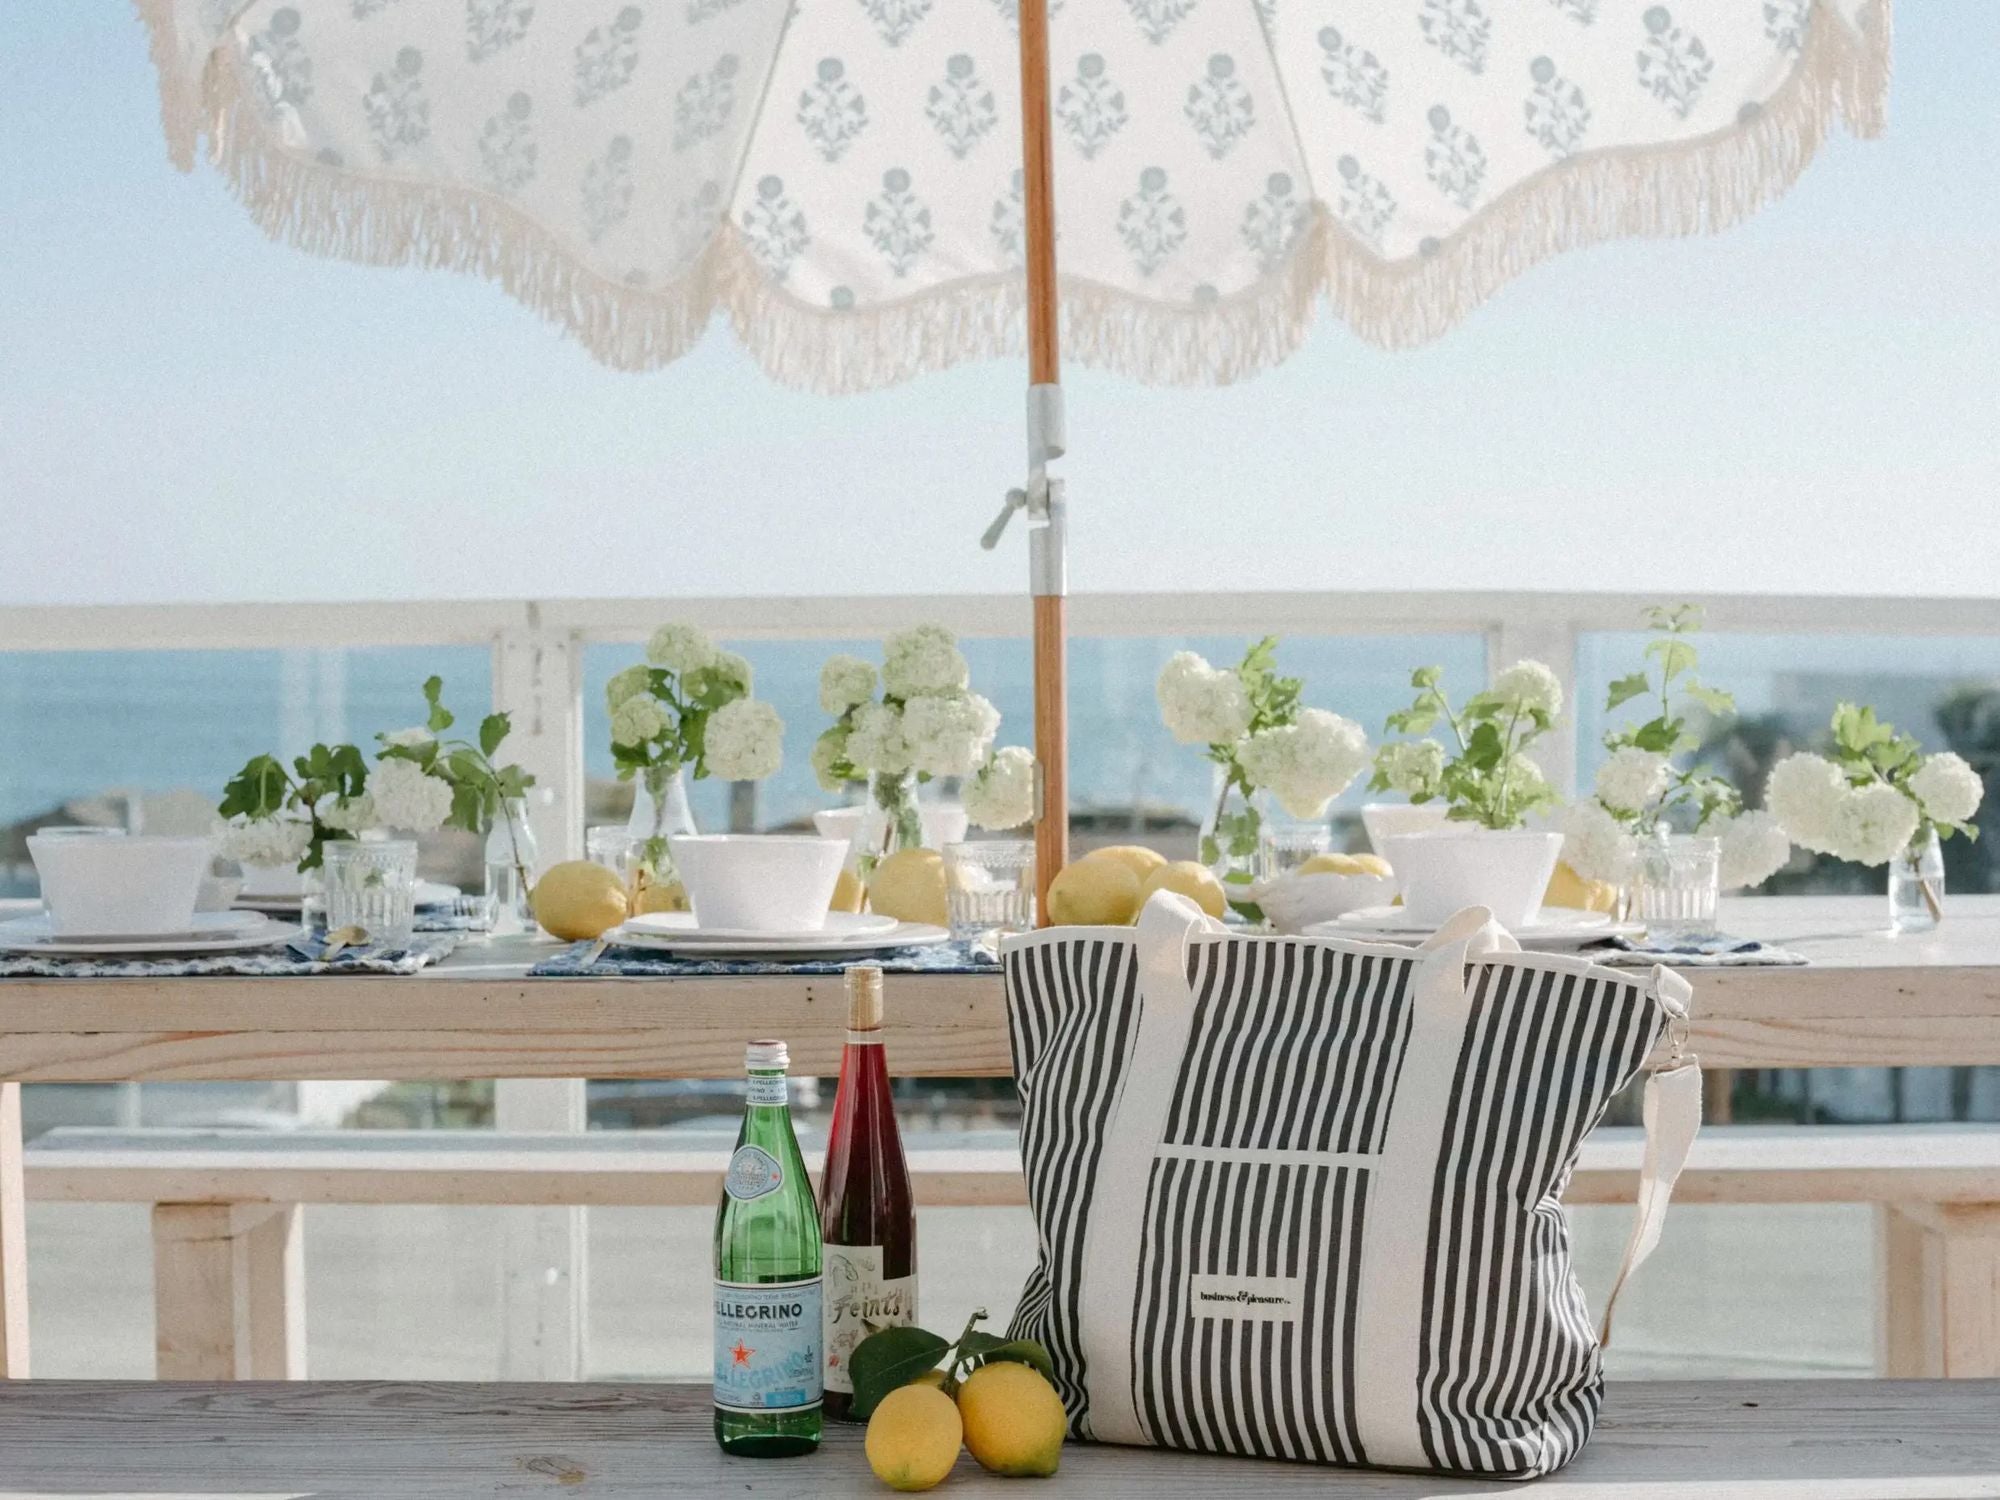 Outside table and umbrella with beverages and a cooler tote bag